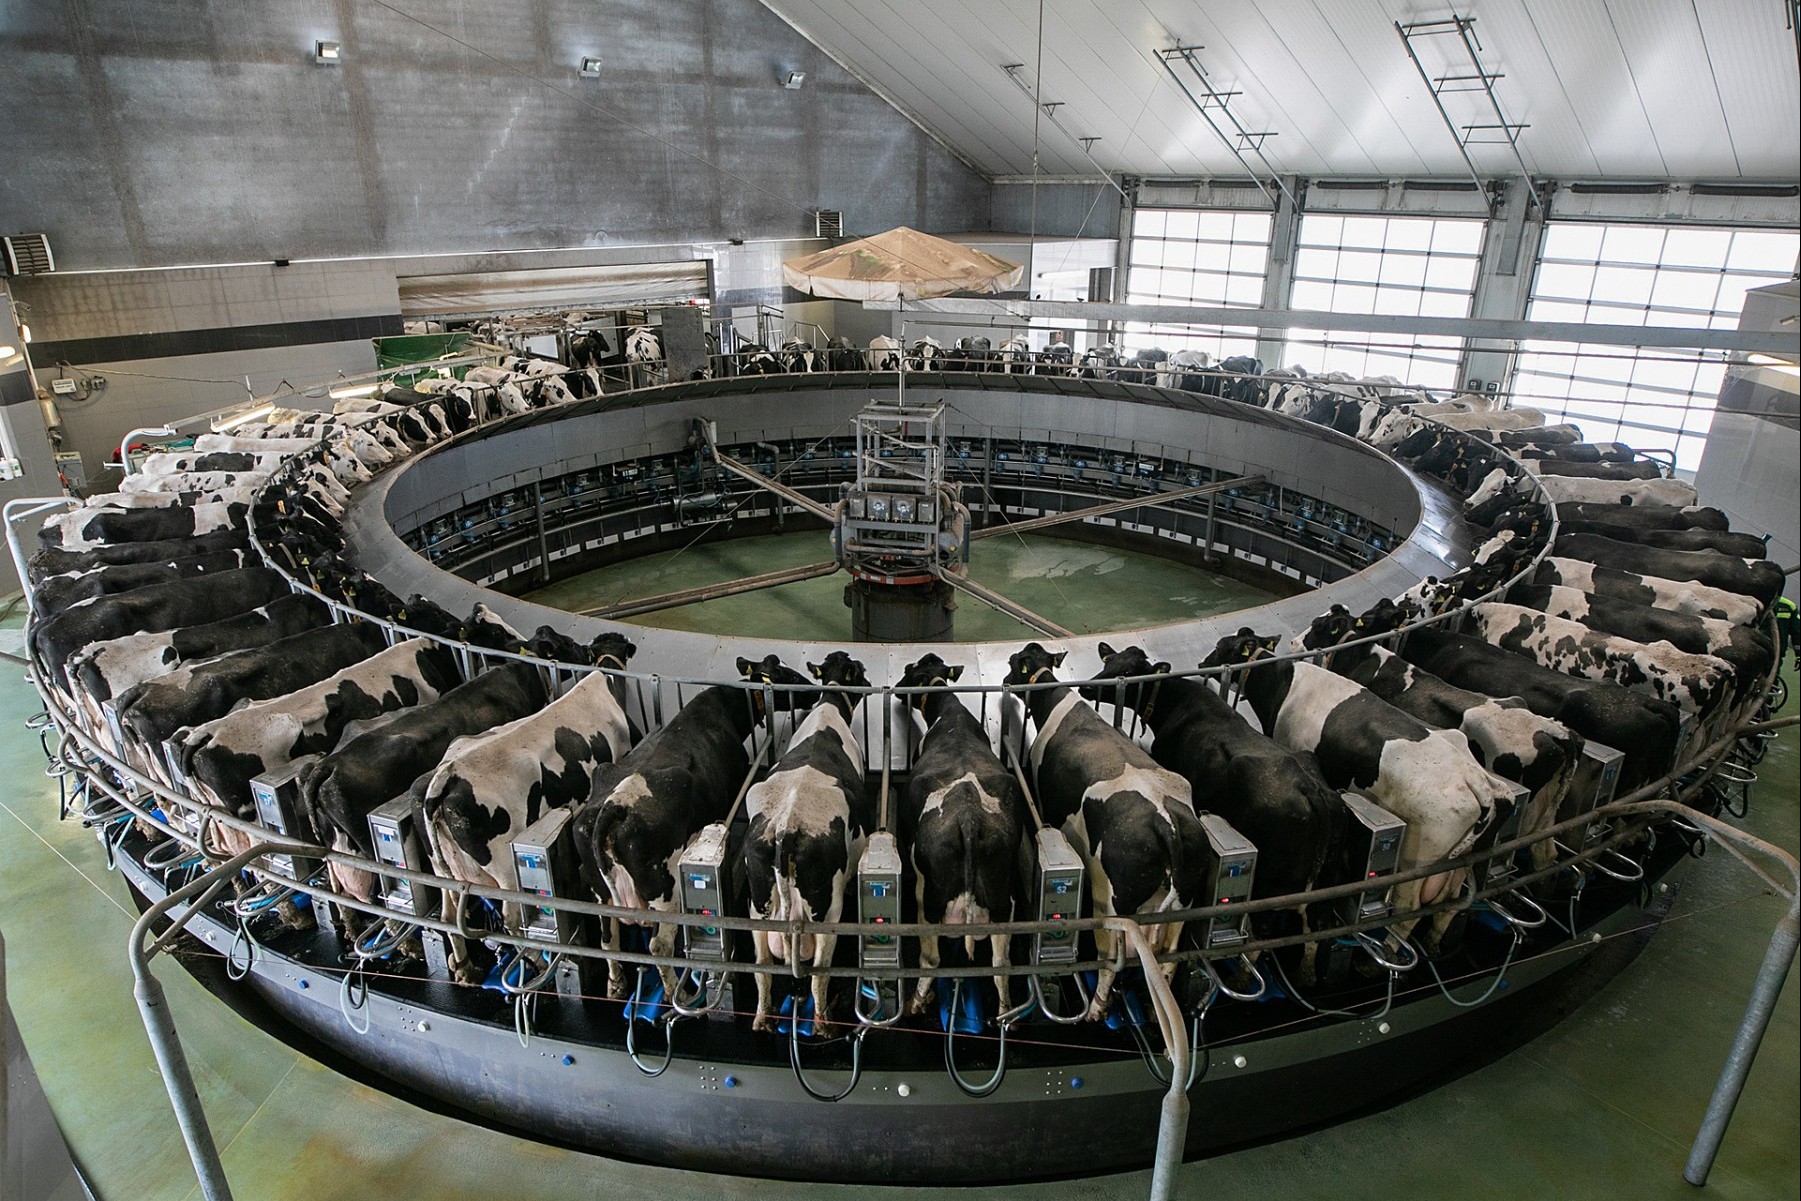 Dairy cows in an automated milking system